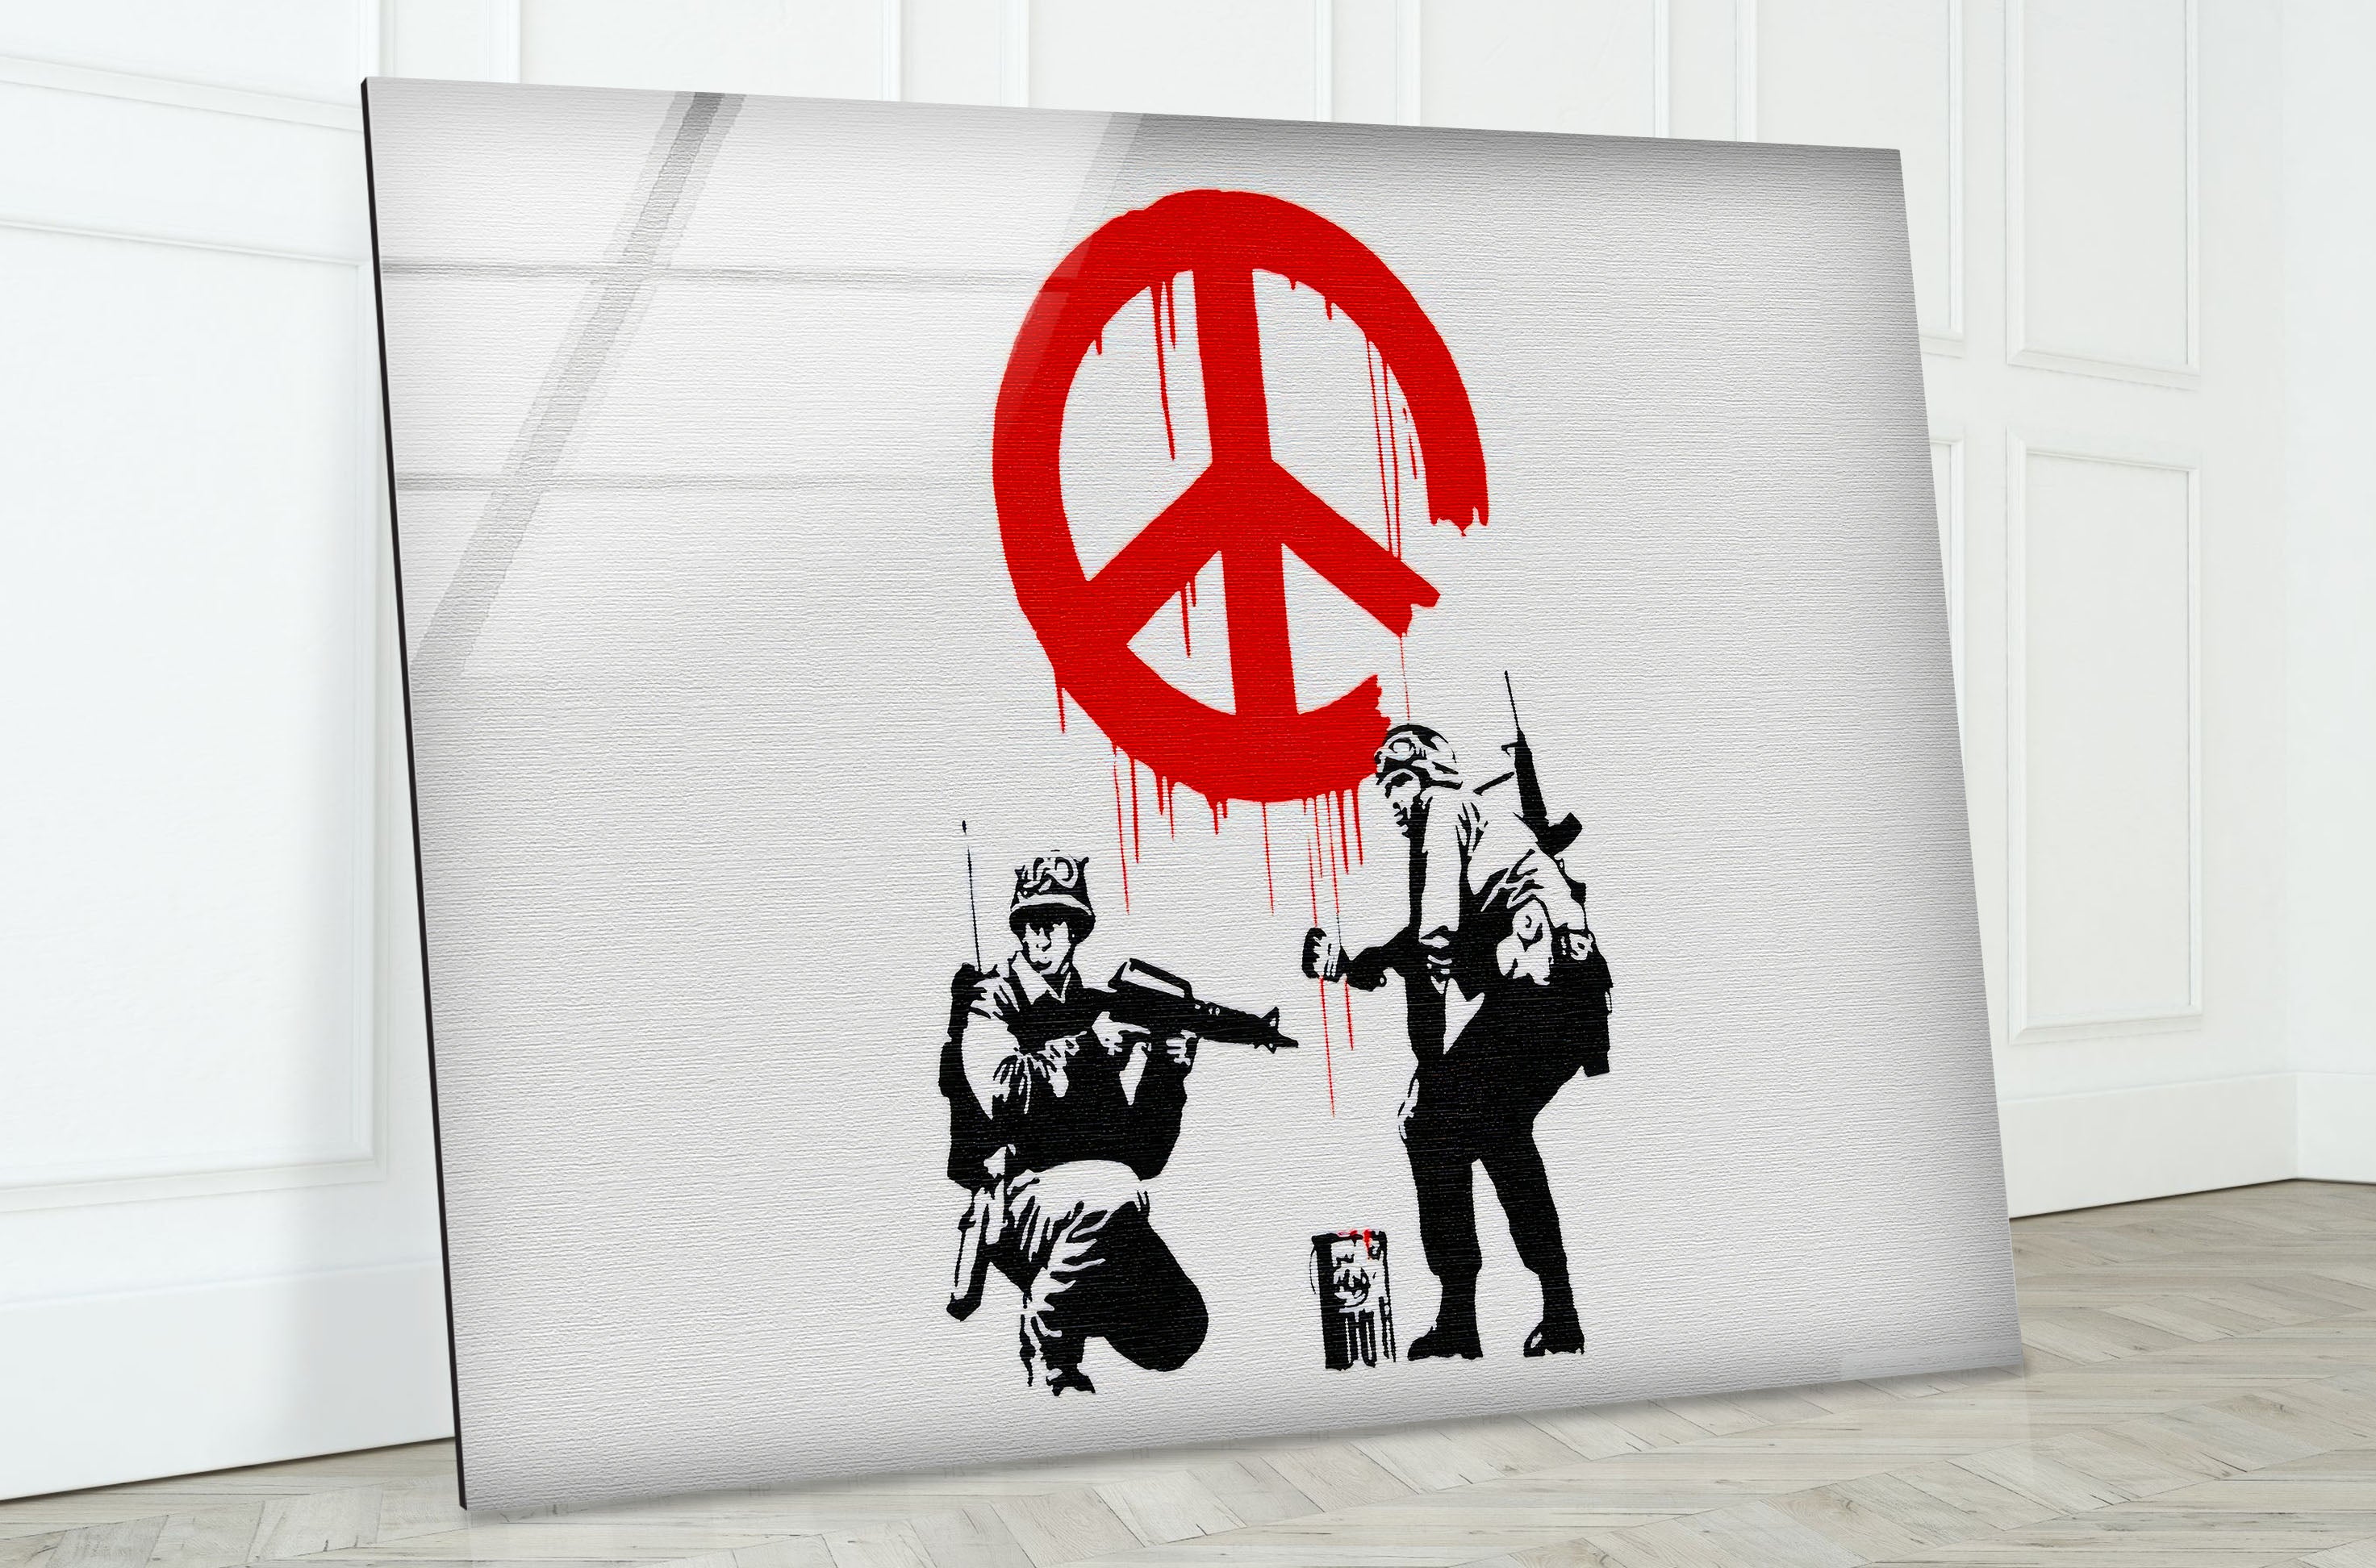 a painting of two people holding guns and a peace sign